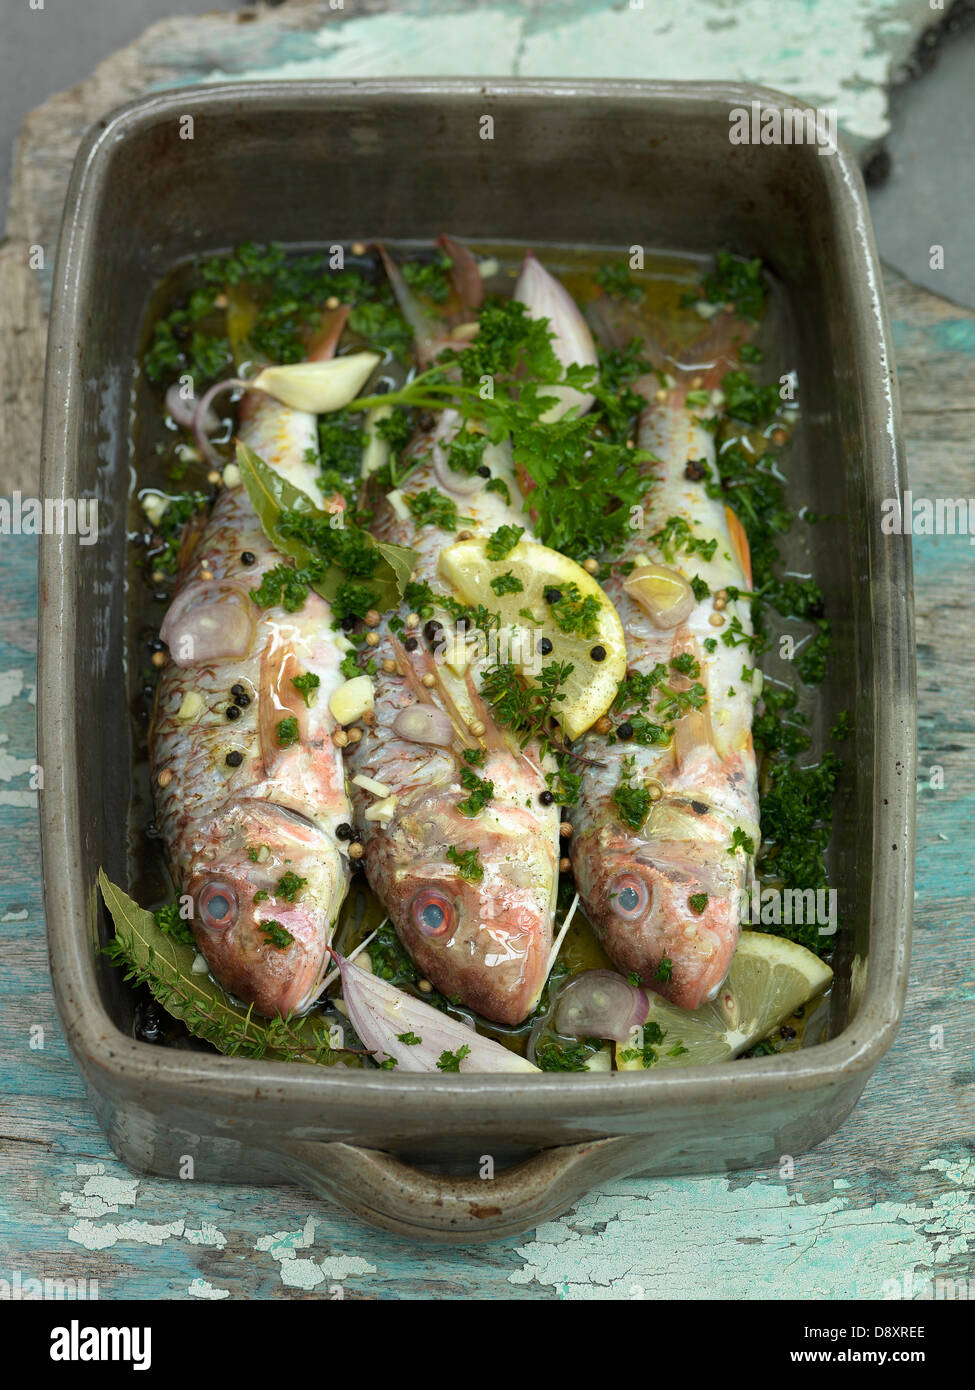 Oven-baked red mullets with herbs Stock Photo